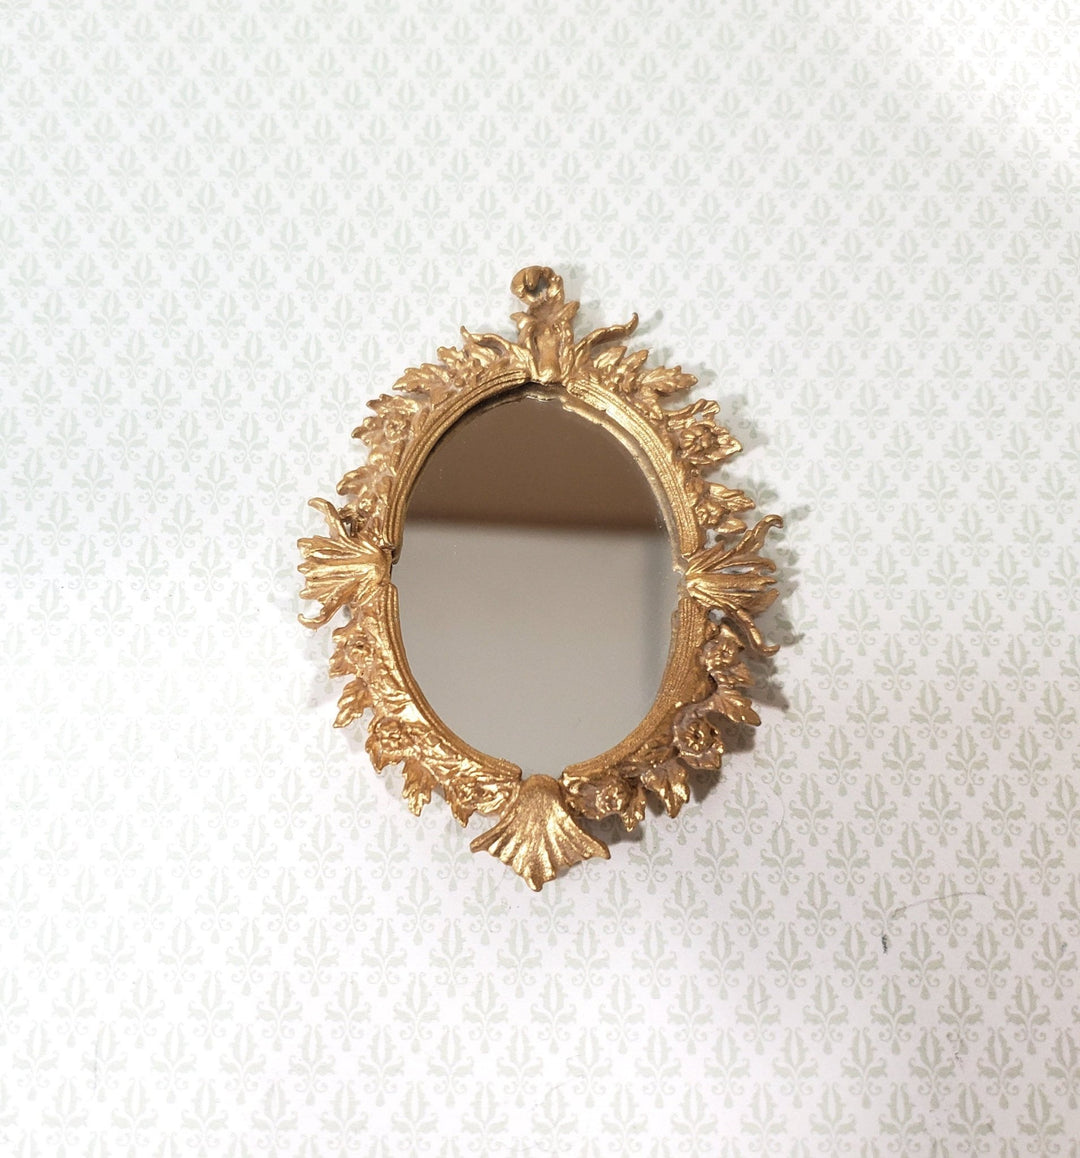 Dollhouse Gilt Mirror French Victorian Style Fancy 1:12 Scale by Falcon A3995 - Miniature Crush